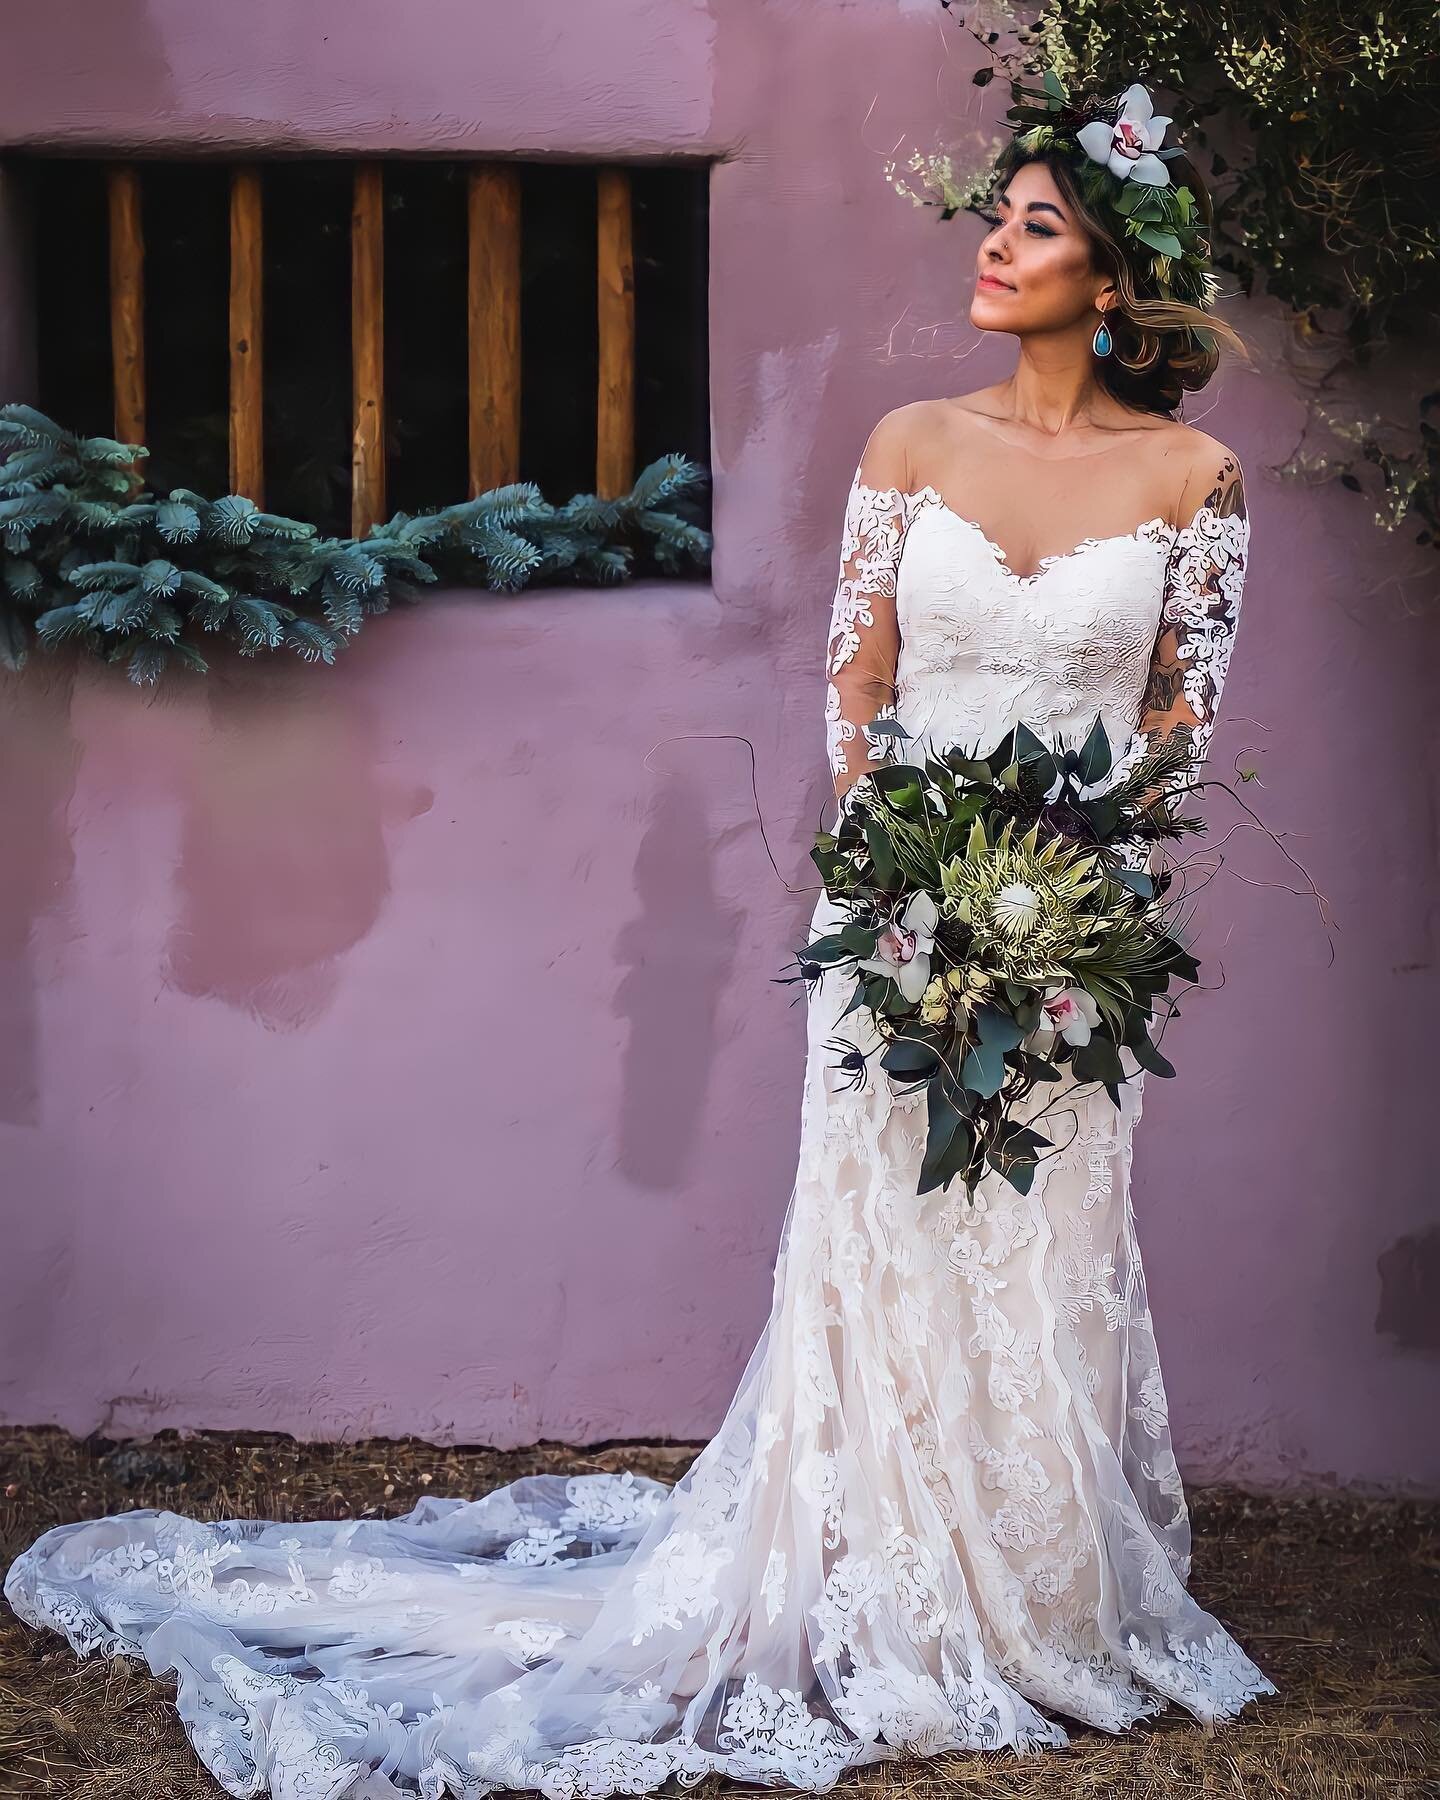 Throw back to this beautiful wedding! Can flower crowns make a comeback pretty please? 

We are drooling over @ggchica whole look! 

Photo @slenentinephotography 
@upinthesycamore_photography 
Makeup x Kata of @something_ginger 
Hair x @vlrenteriahai